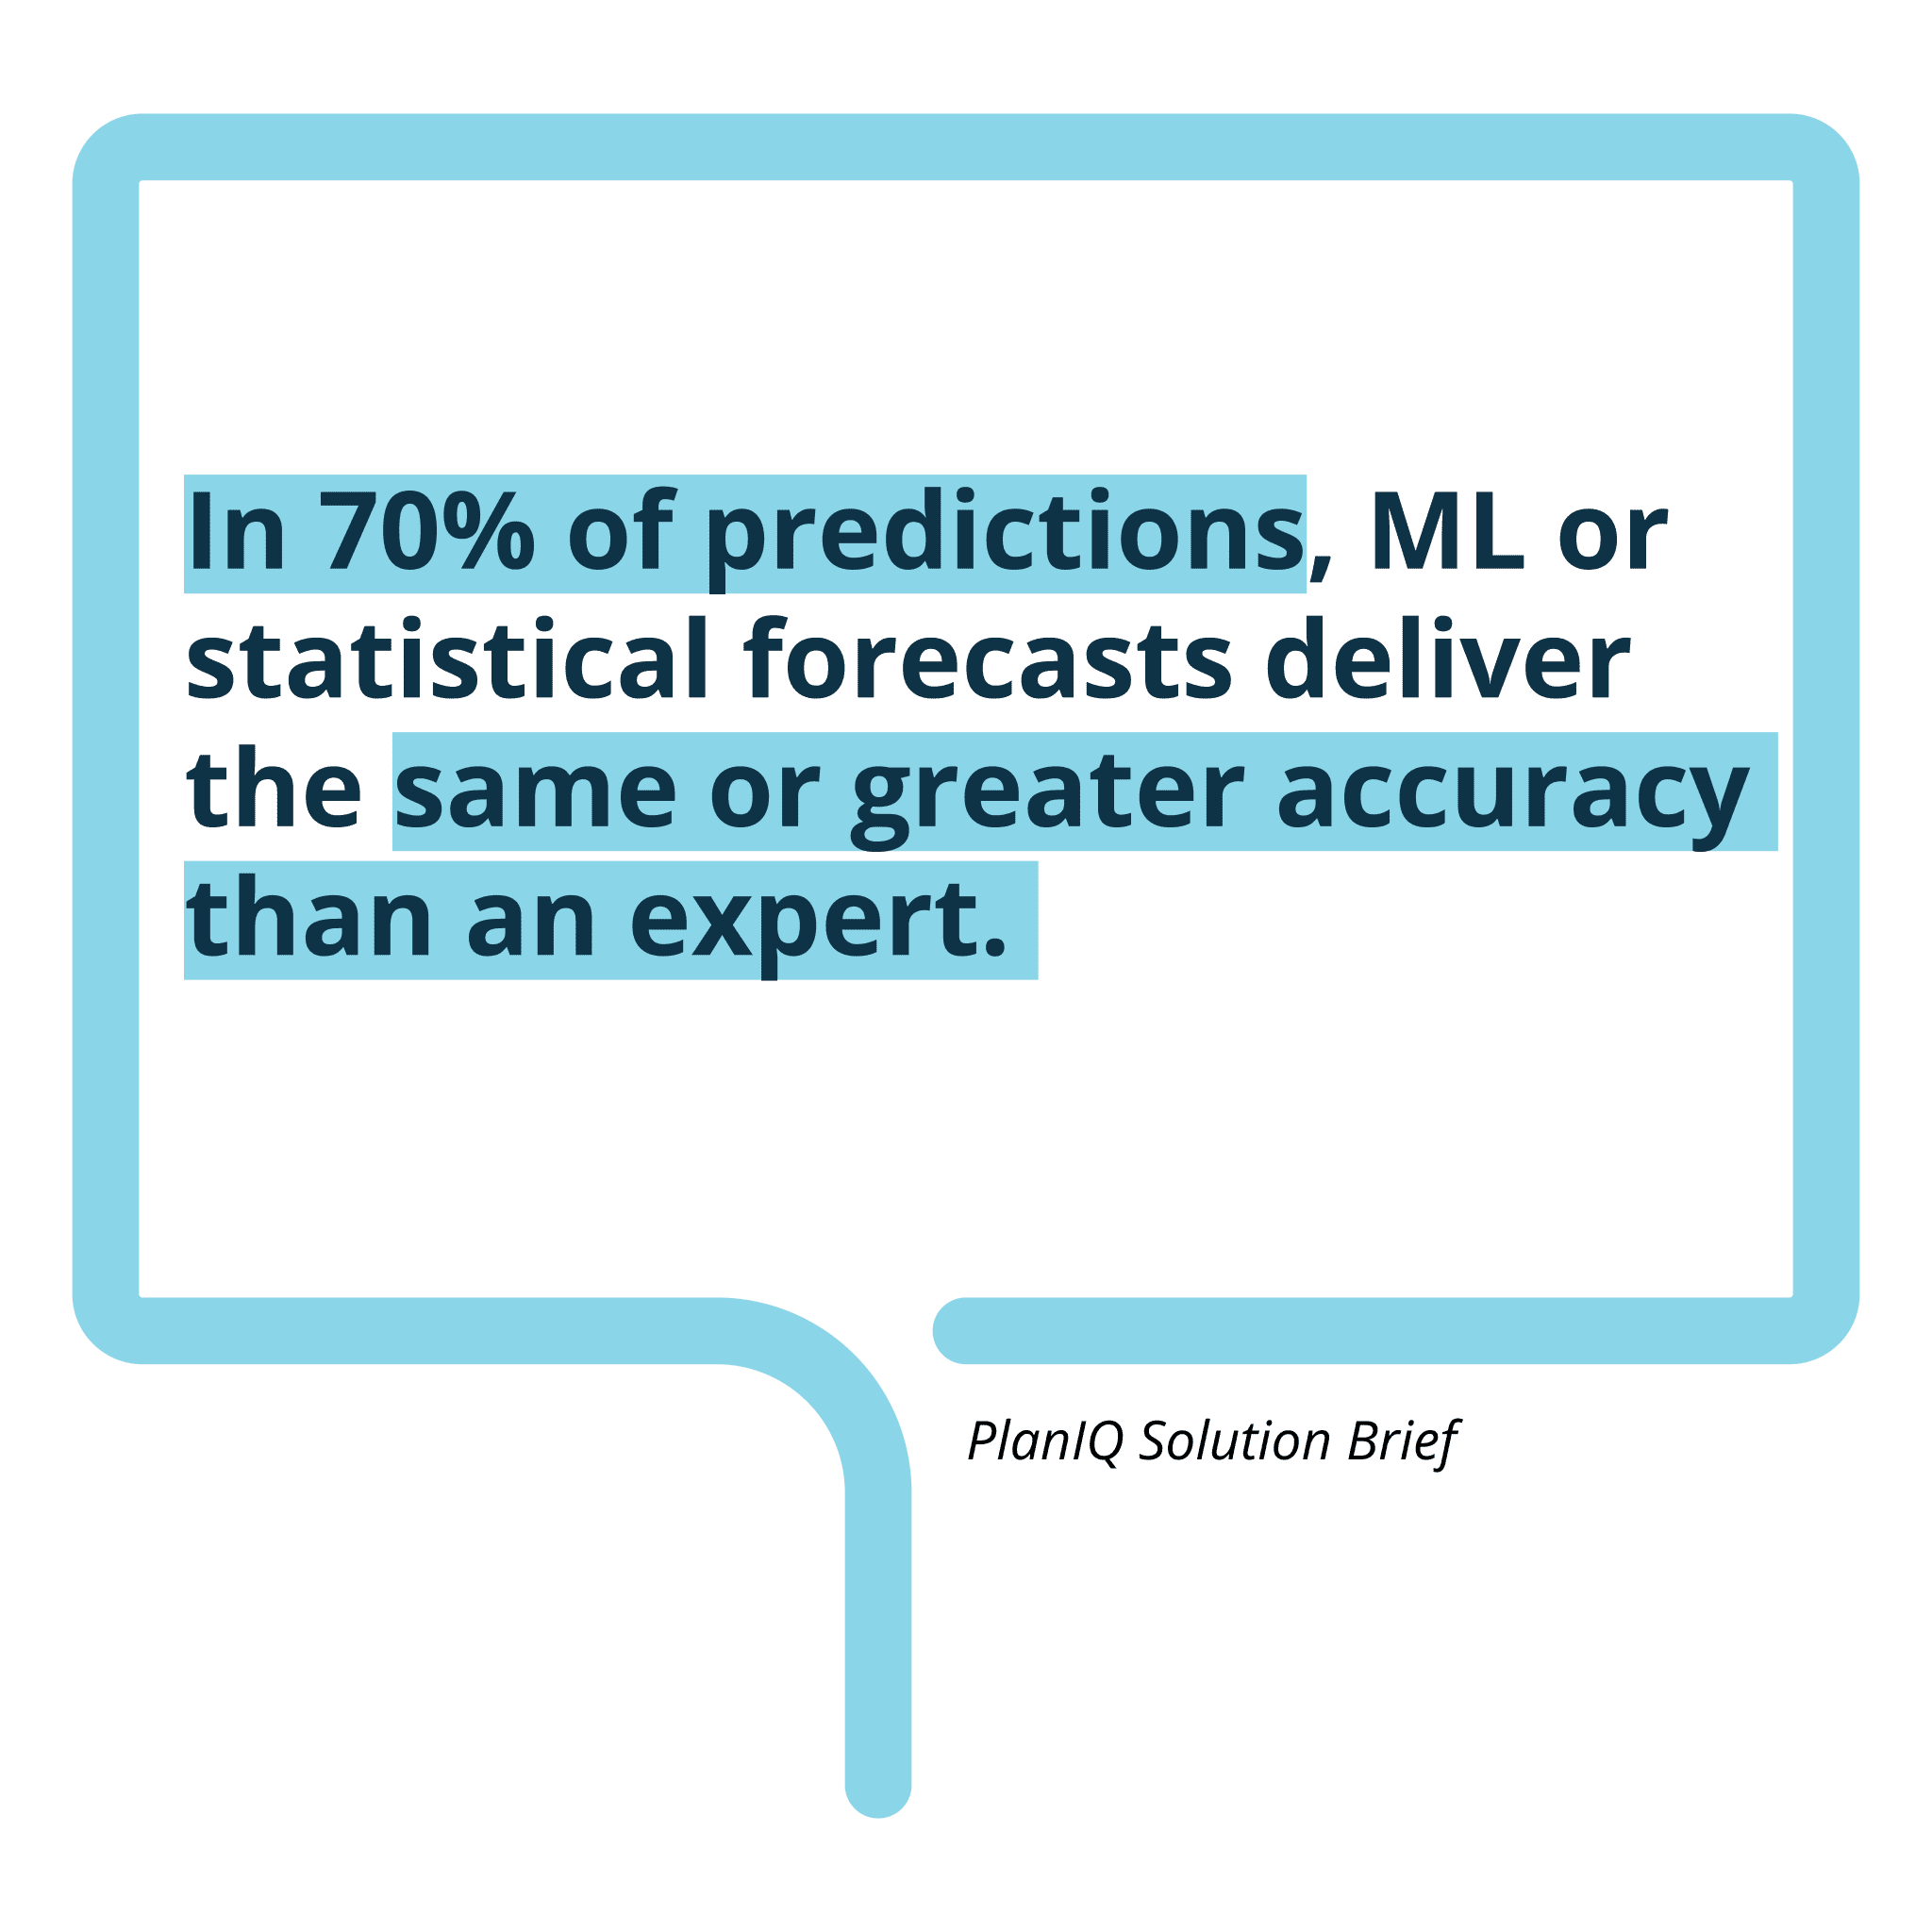 In 70% of predictions, ML or statistical forecasts deliver the same or greater accuracy than an expert. - PlanIQ Solution Brief